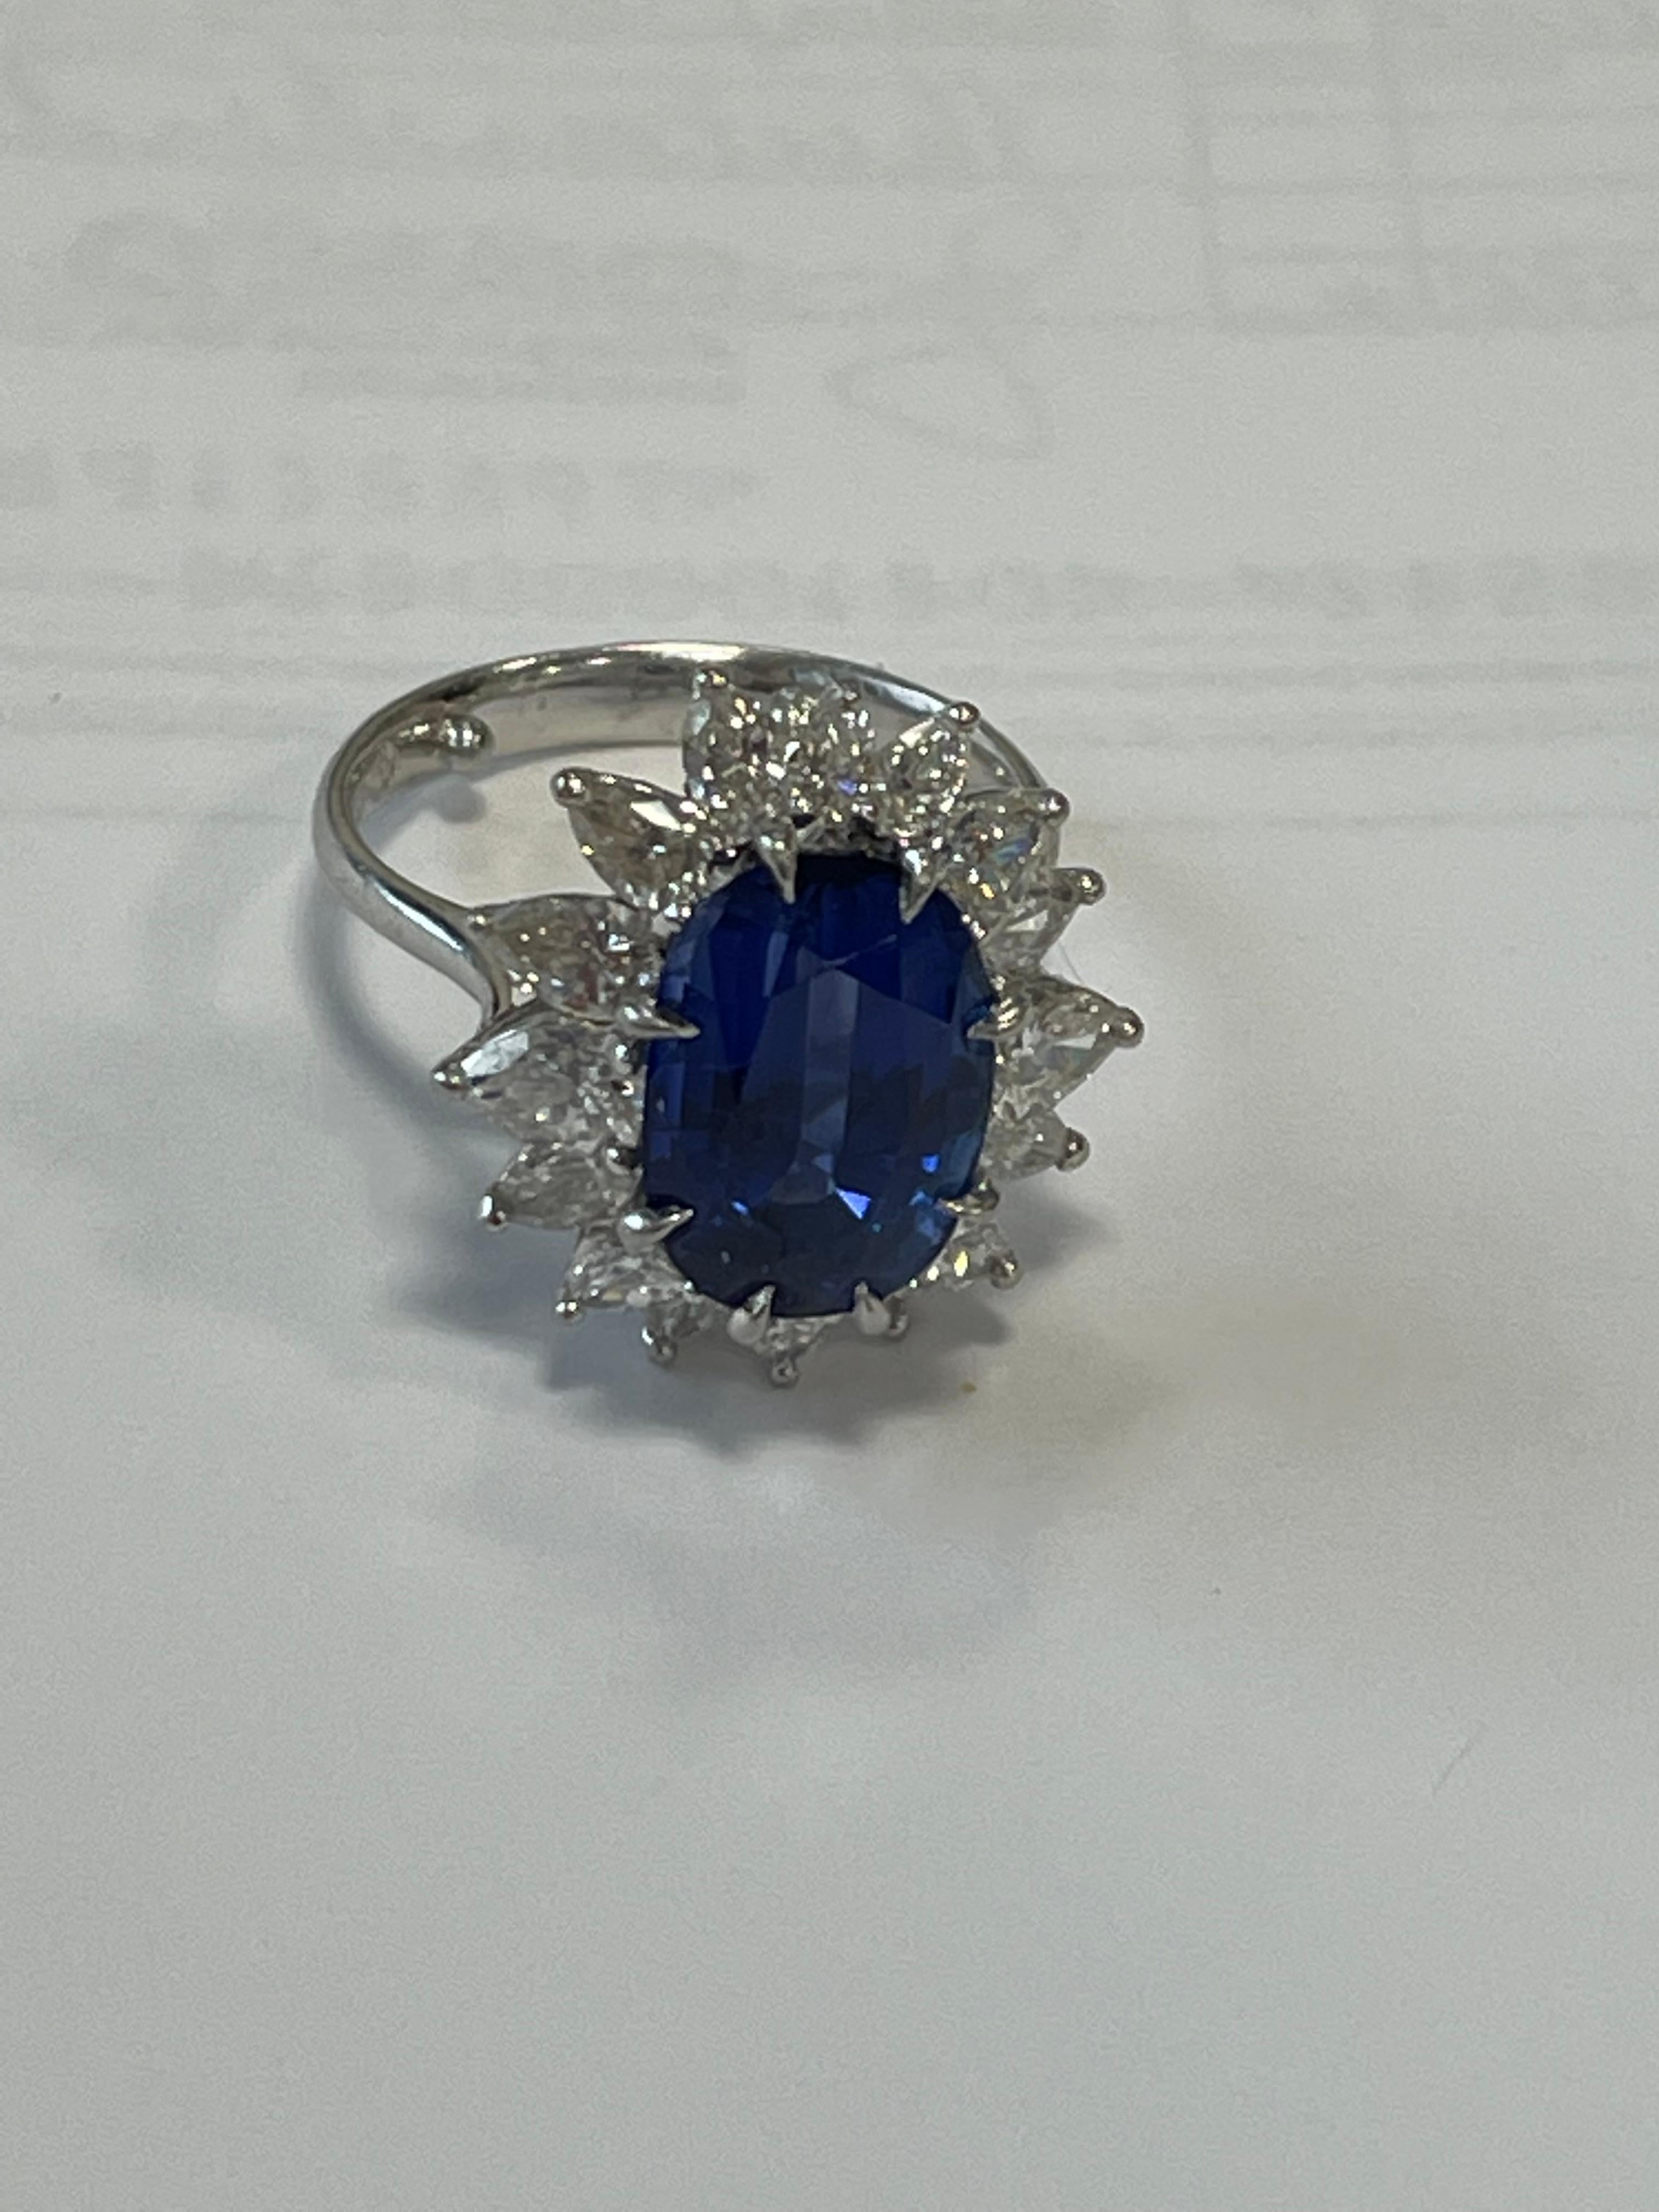 Women's 5.30 Carat Ceylon Sapphire Ring with 16 Pear Shape Diamonds 1.65 Ct by McTigue For Sale